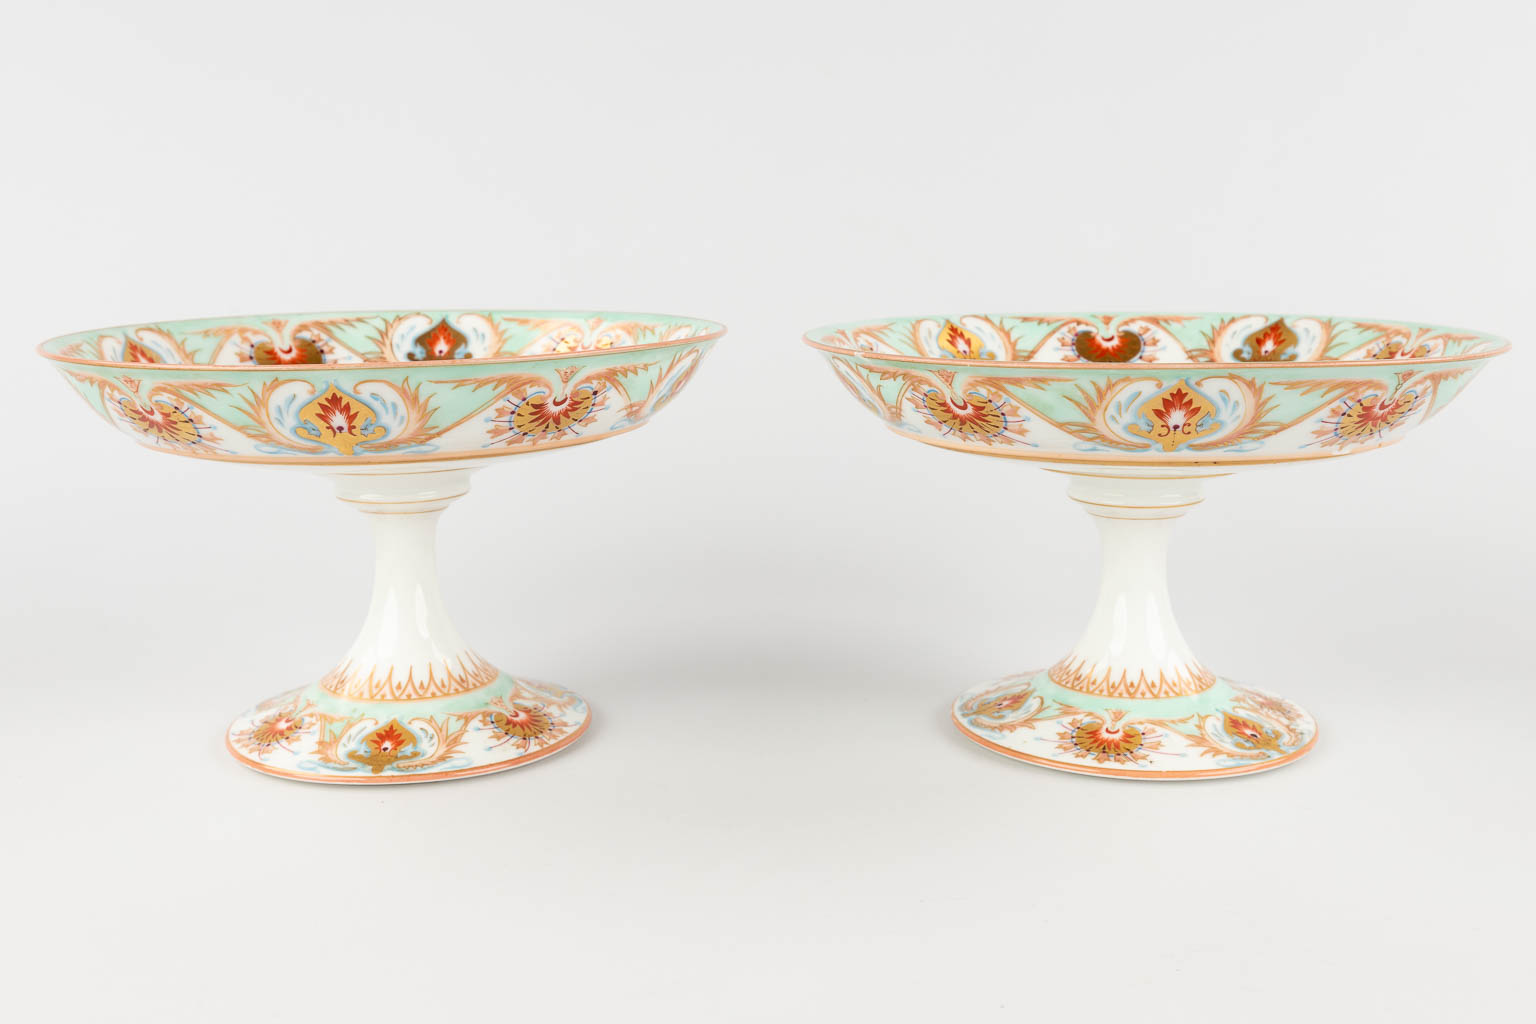 A set of 2 tazza and 6 plates, Count 